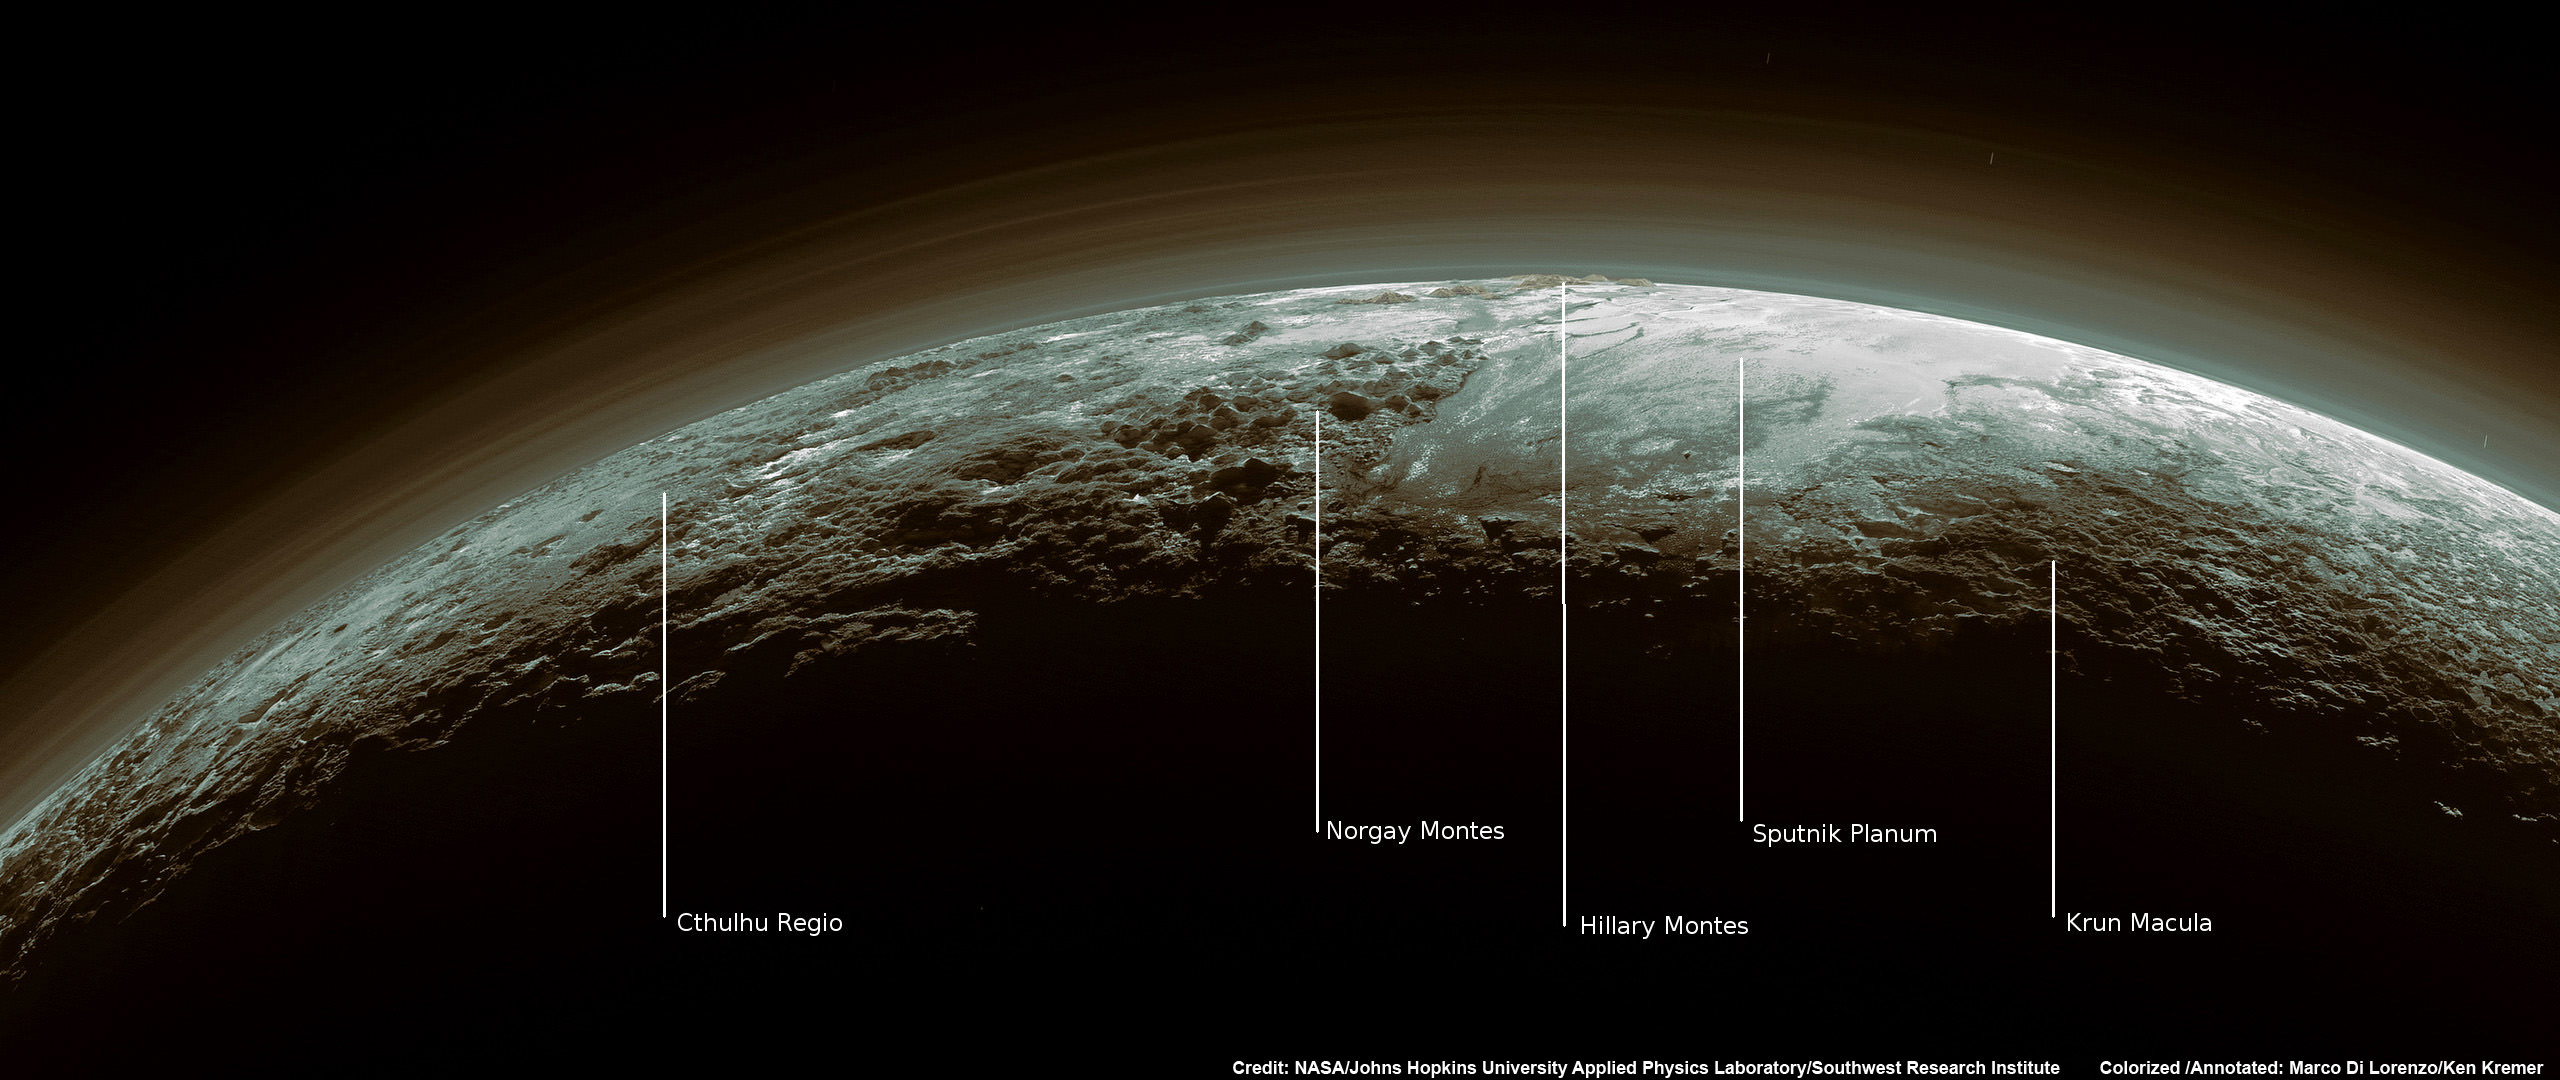 Just 15 minutes after its closest approach to Pluto on July 14, 2015, NASA's New Horizons spacecraft looked back toward the sun and captured this near-sunset view of the rugged, icy mountains and flat ice plains extending to Pluto's horizon - shown in this colorized rendition. The smooth expanse of the informally named icy plain Sputnik Planum (right) is flanked to the west (left) by rugged mountains up to 11,000 feet (3,500 meters) high, including the informally named Norgay Montes in the foreground and Hillary Montes on the skyline. To the right, east of Sputnik, rougher terrain is cut by apparent glaciers. The backlighting highlights more than a dozen layers of haze in Pluto’s tenuous but distended atmosphere. The image was taken from a distance of 11,000 miles (18,000 kilometers) to Pluto; the scene is 780 miles (1,250 kilometers) wide. Credit: NASA/Johns Hopkins University Applied Physics Laboratory/Southwest Research Institute. Colorized/Annotated: Marco Di Lorenzo/Ken Kremer/kenkremer.com 